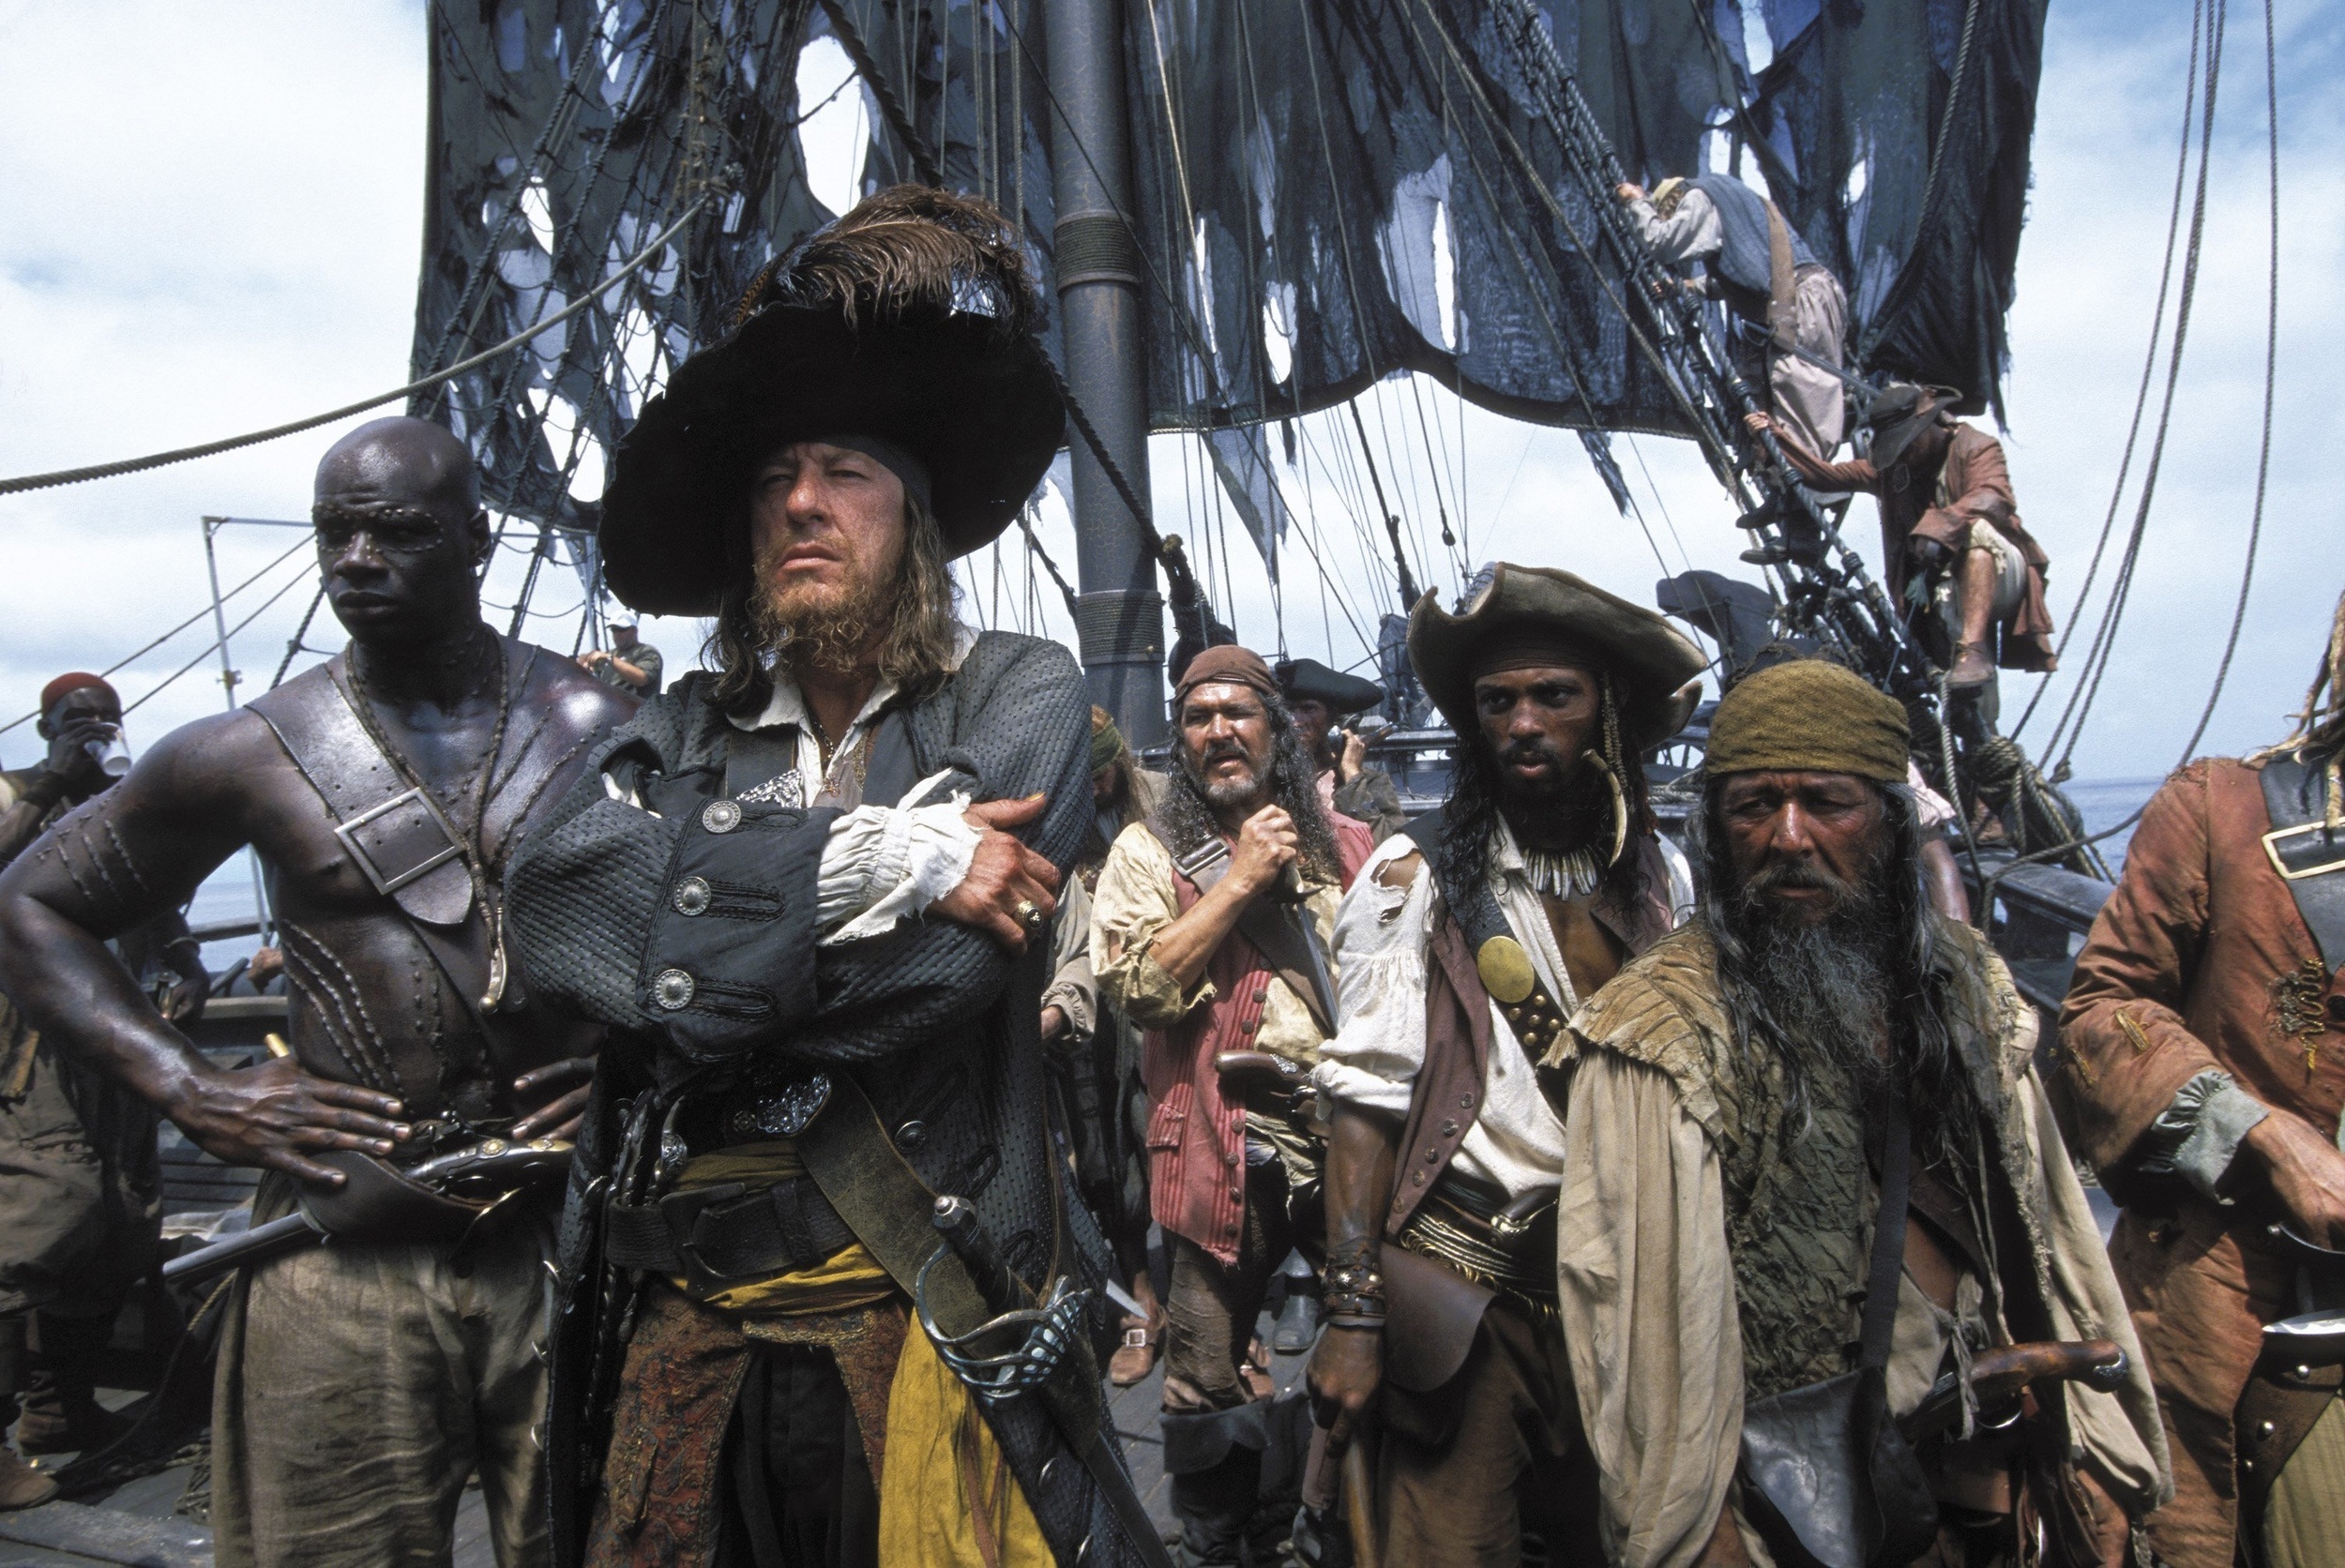 <p>While CGI rules the day in films, and there’s plenty of digital effects in <em>Curse of the Black Pearl</em>, there is also plenty of practical effect work in this movie. Dyes were used to create the rotten teeth and scurvy-affected skin of the pirates. Also, contact lenses were used for several character’s eyes, including Ragetti’s wooden eye.</p><p><a href='https://www.msn.com/en-us/community/channel/vid-cj9pqbr0vn9in2b6ddcd8sfgpfq6x6utp44fssrv6mc2gtybw0us'>Follow us on MSN to see more of our exclusive entertainment content.</a></p>